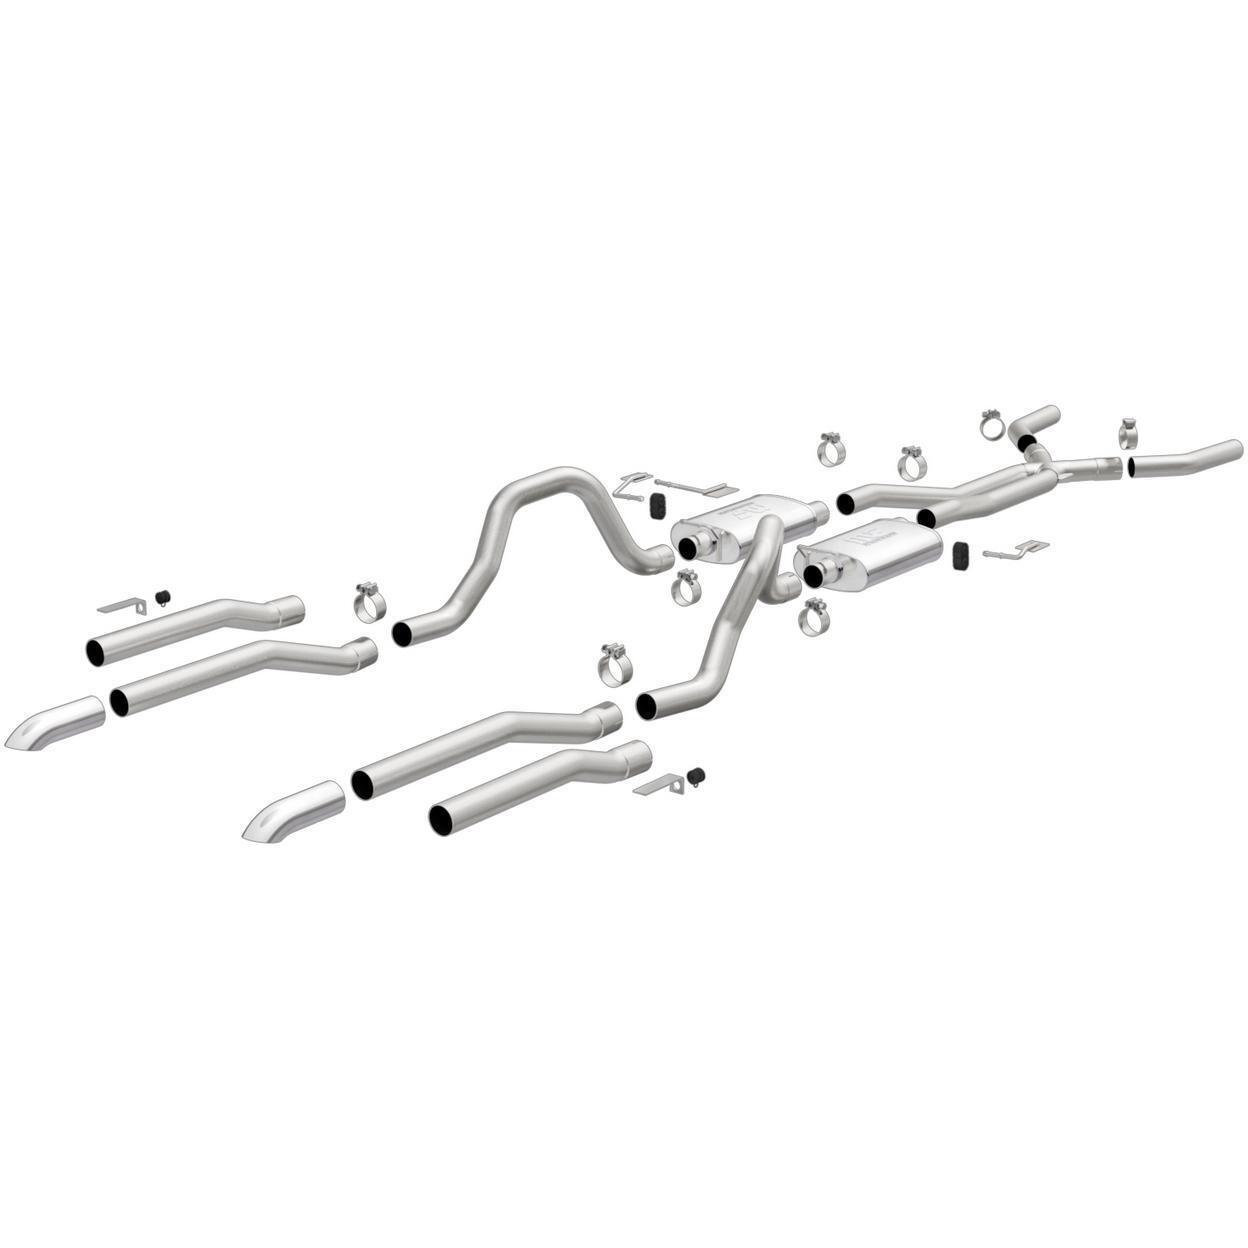 Exhaust System Kit for 1962-1965 Plymouth Belvedere